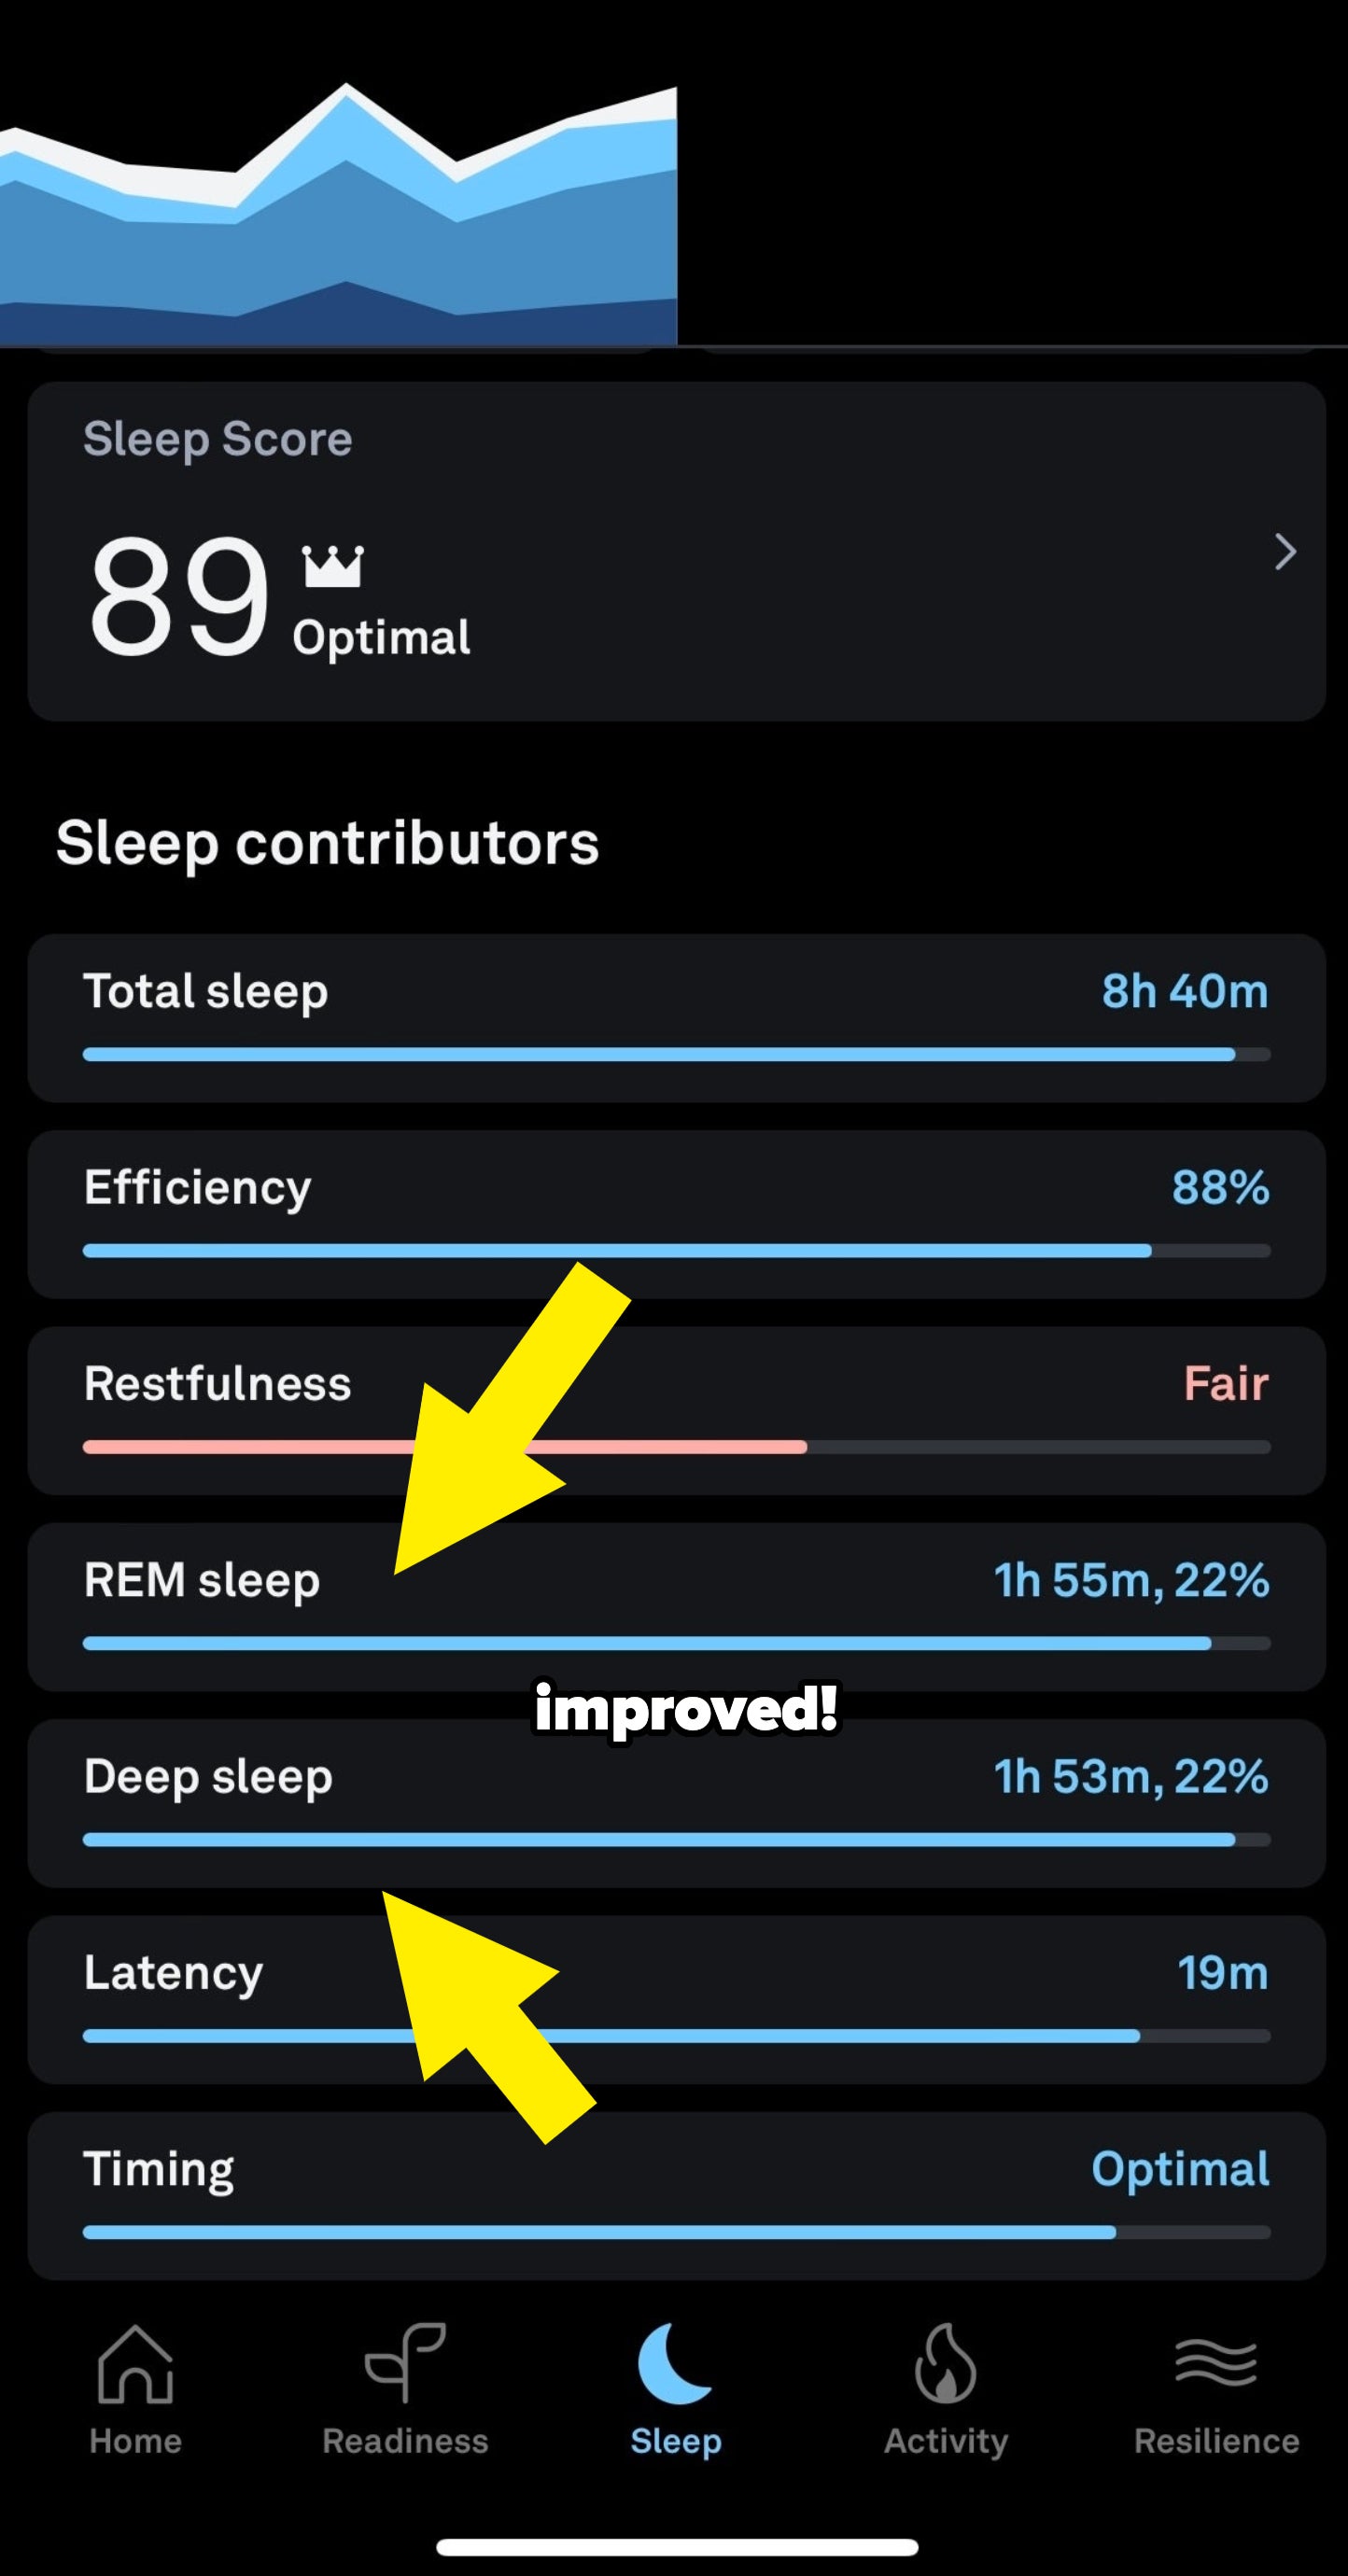 Sleep tracking app interface showing statistics on sleep quality, efficiency, and stages, with a graph overview